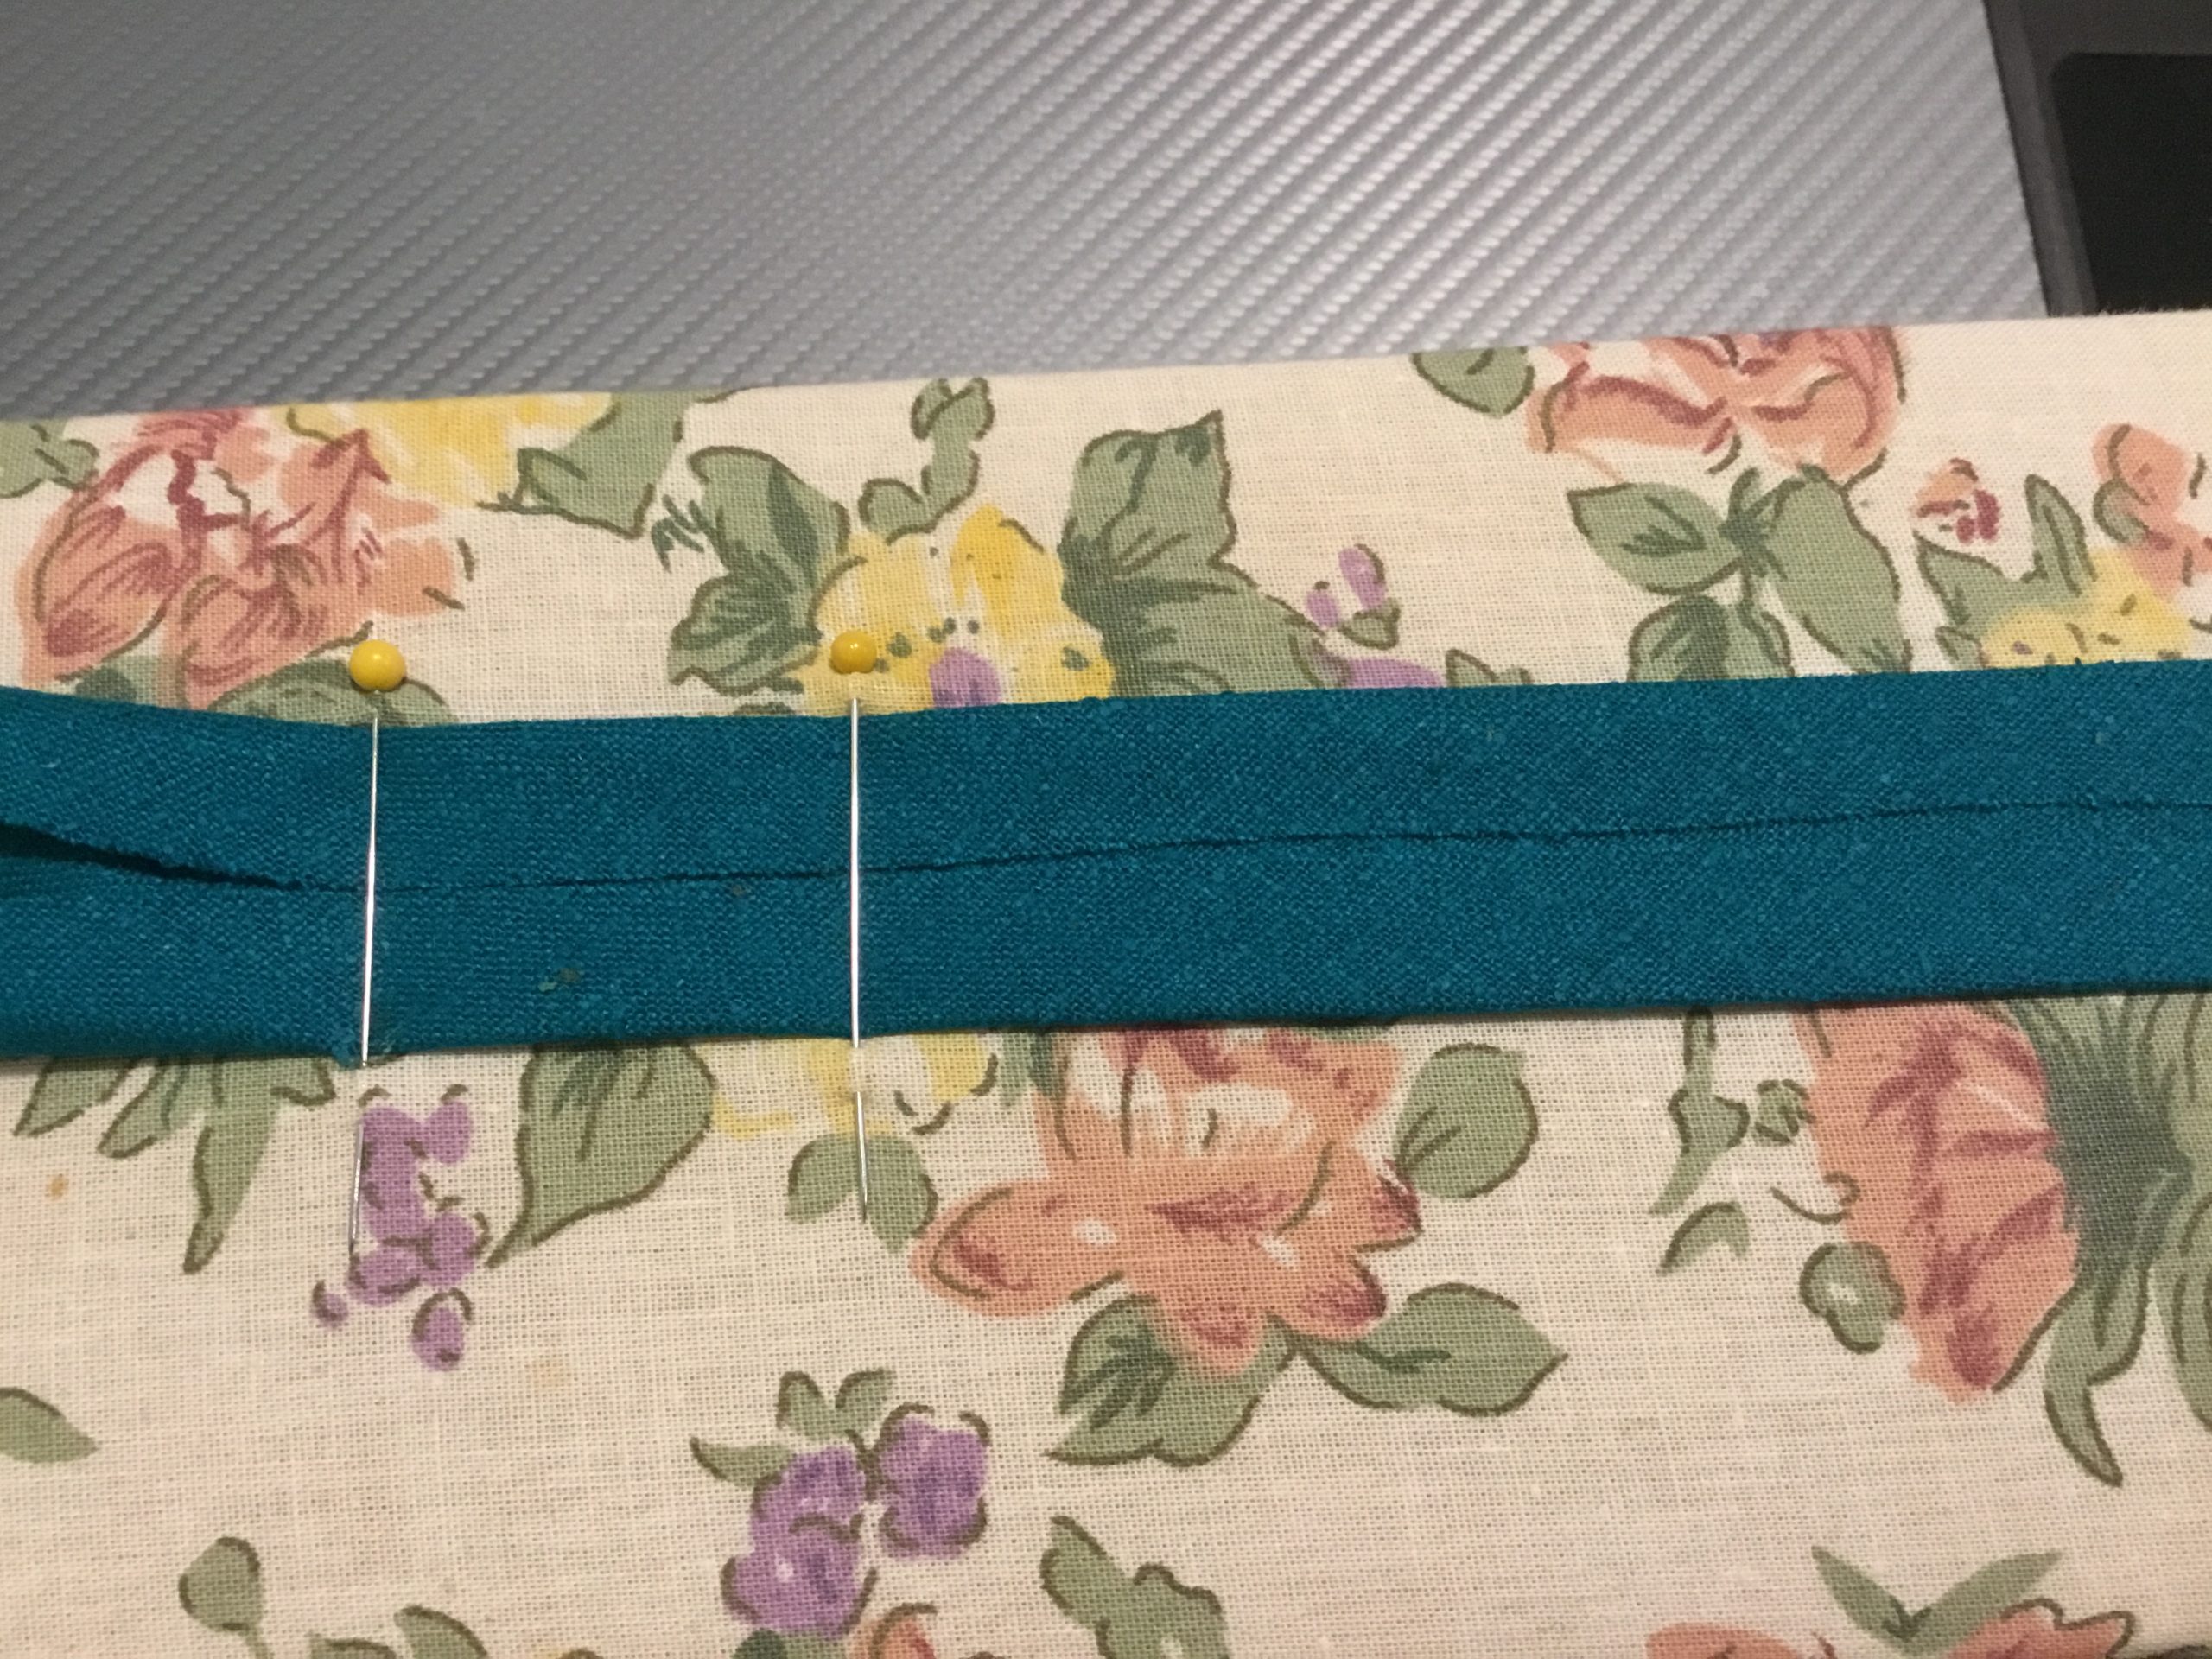 Image of ironing board with pins making bias tape